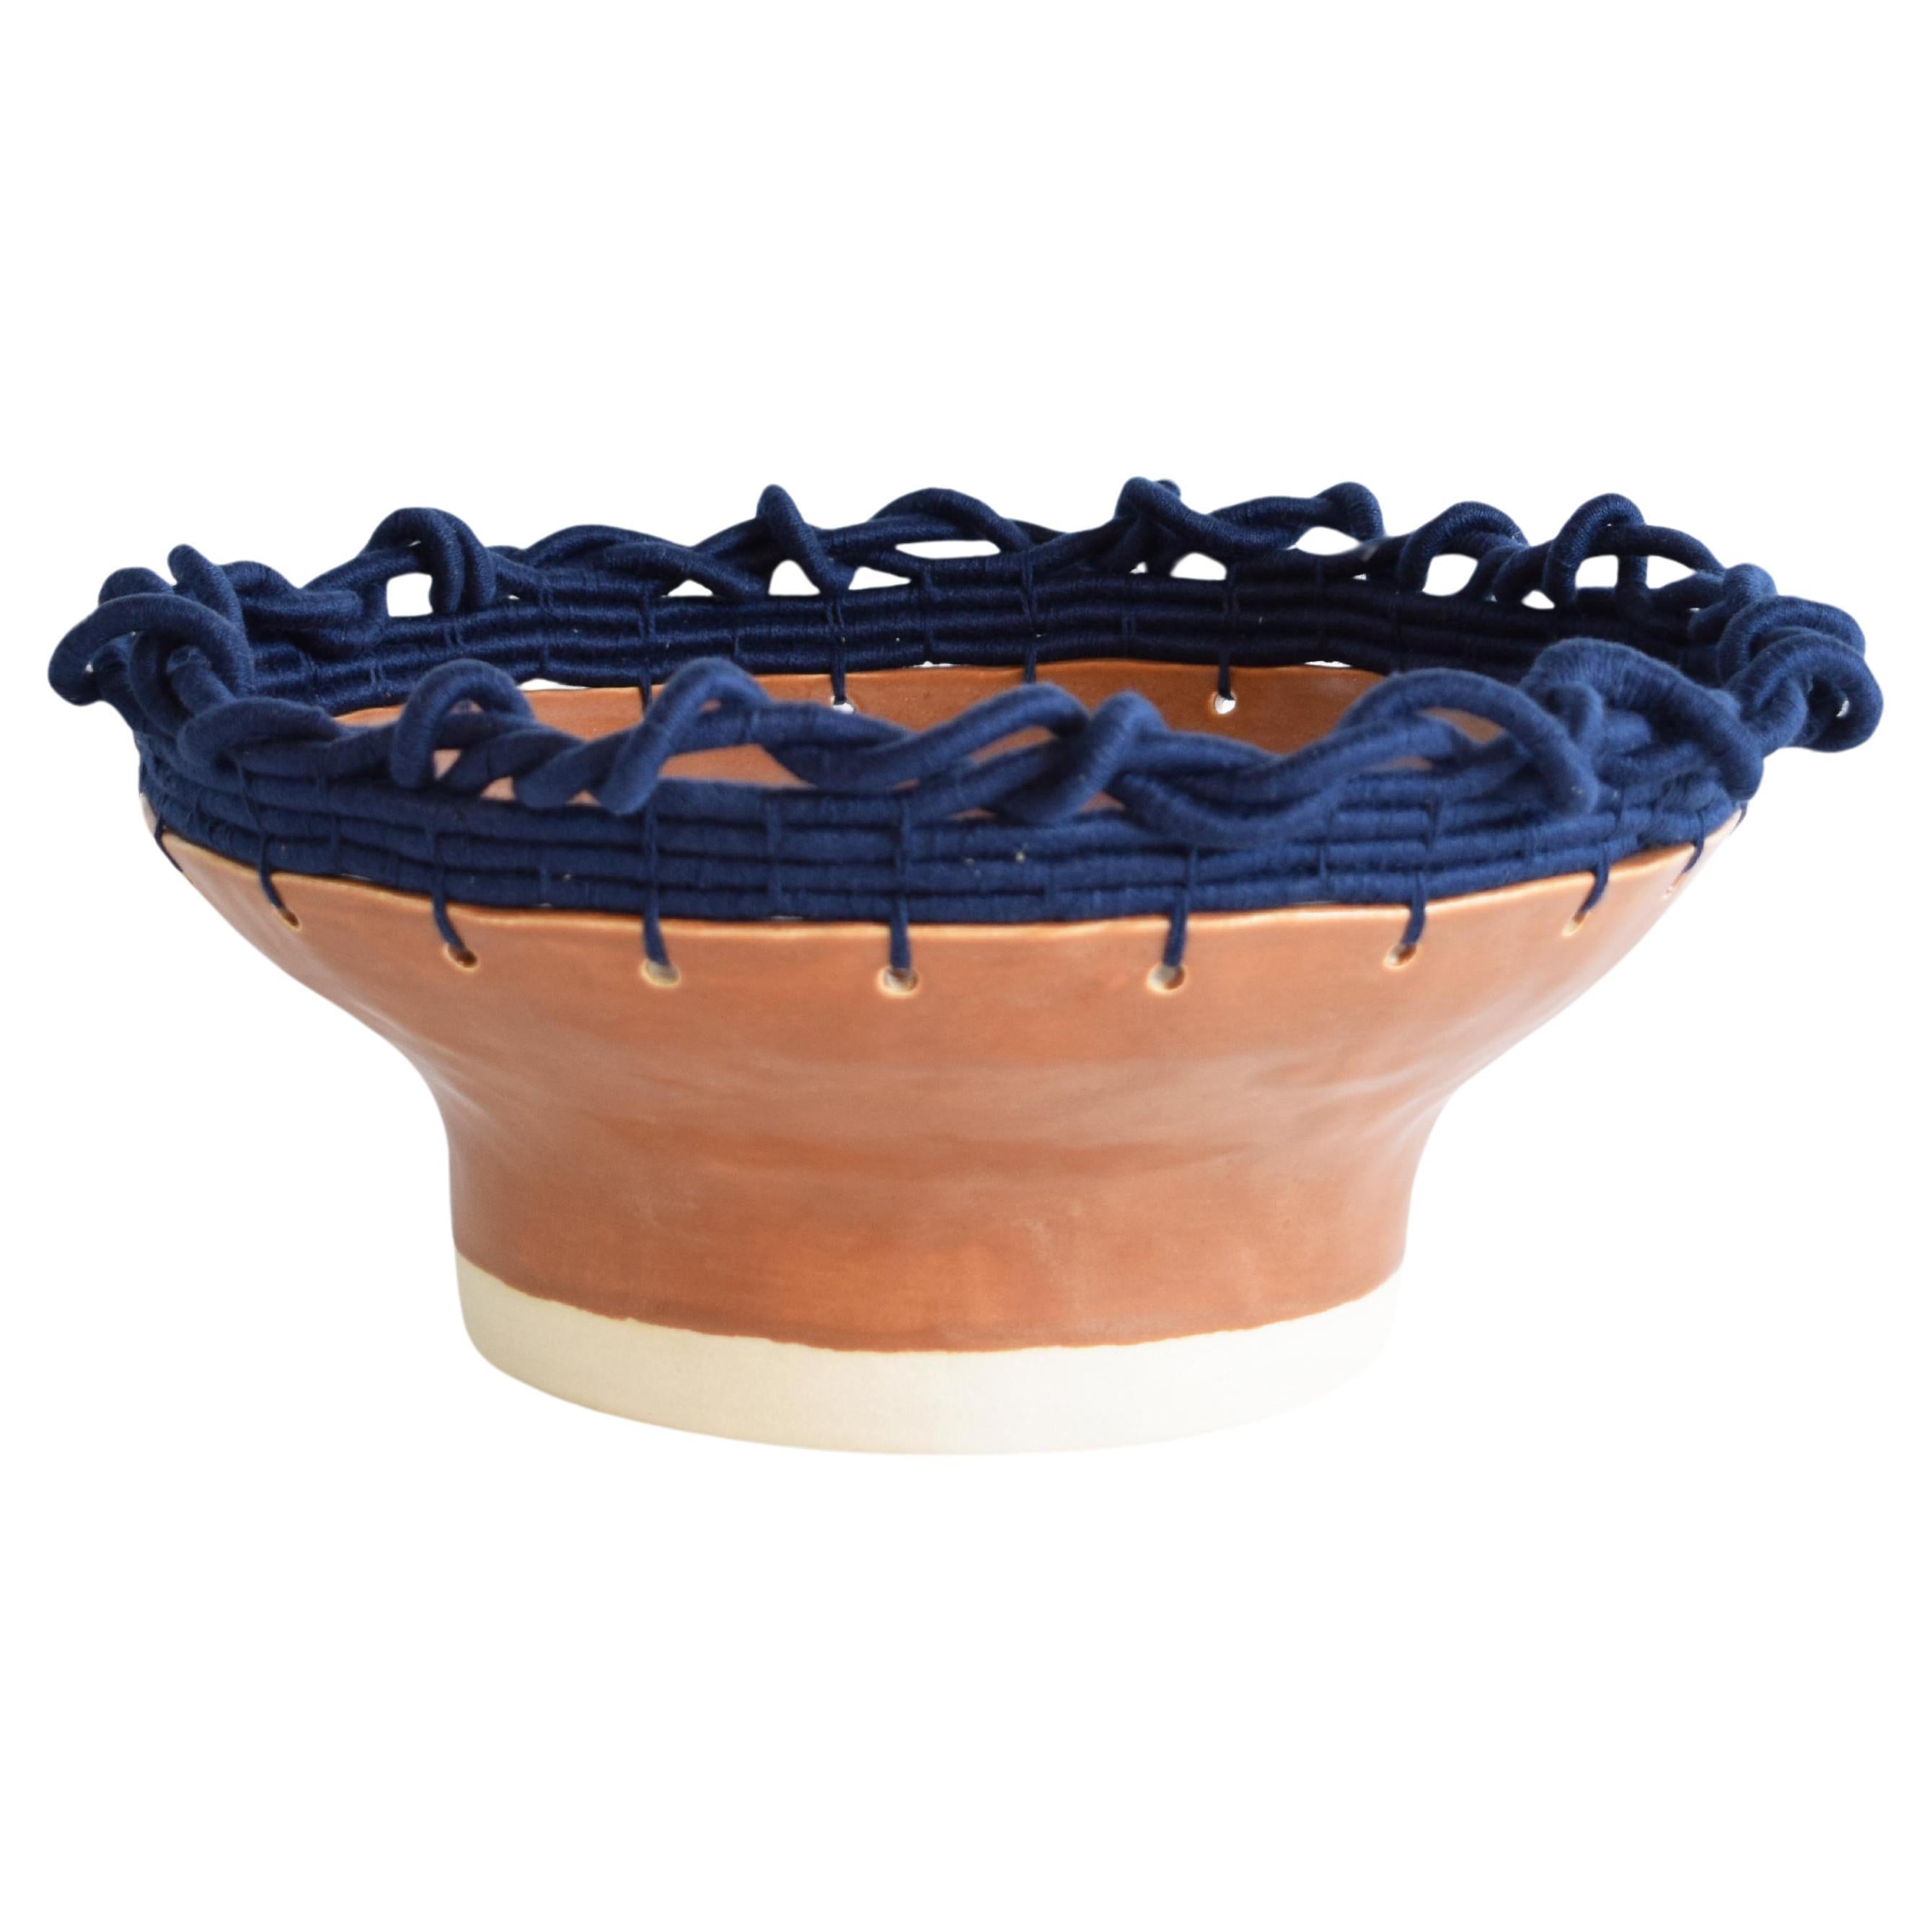 One of a Kind Handmade Ceramic Bowl #803, Brown Glaze & Woven Navy Blue Cotton